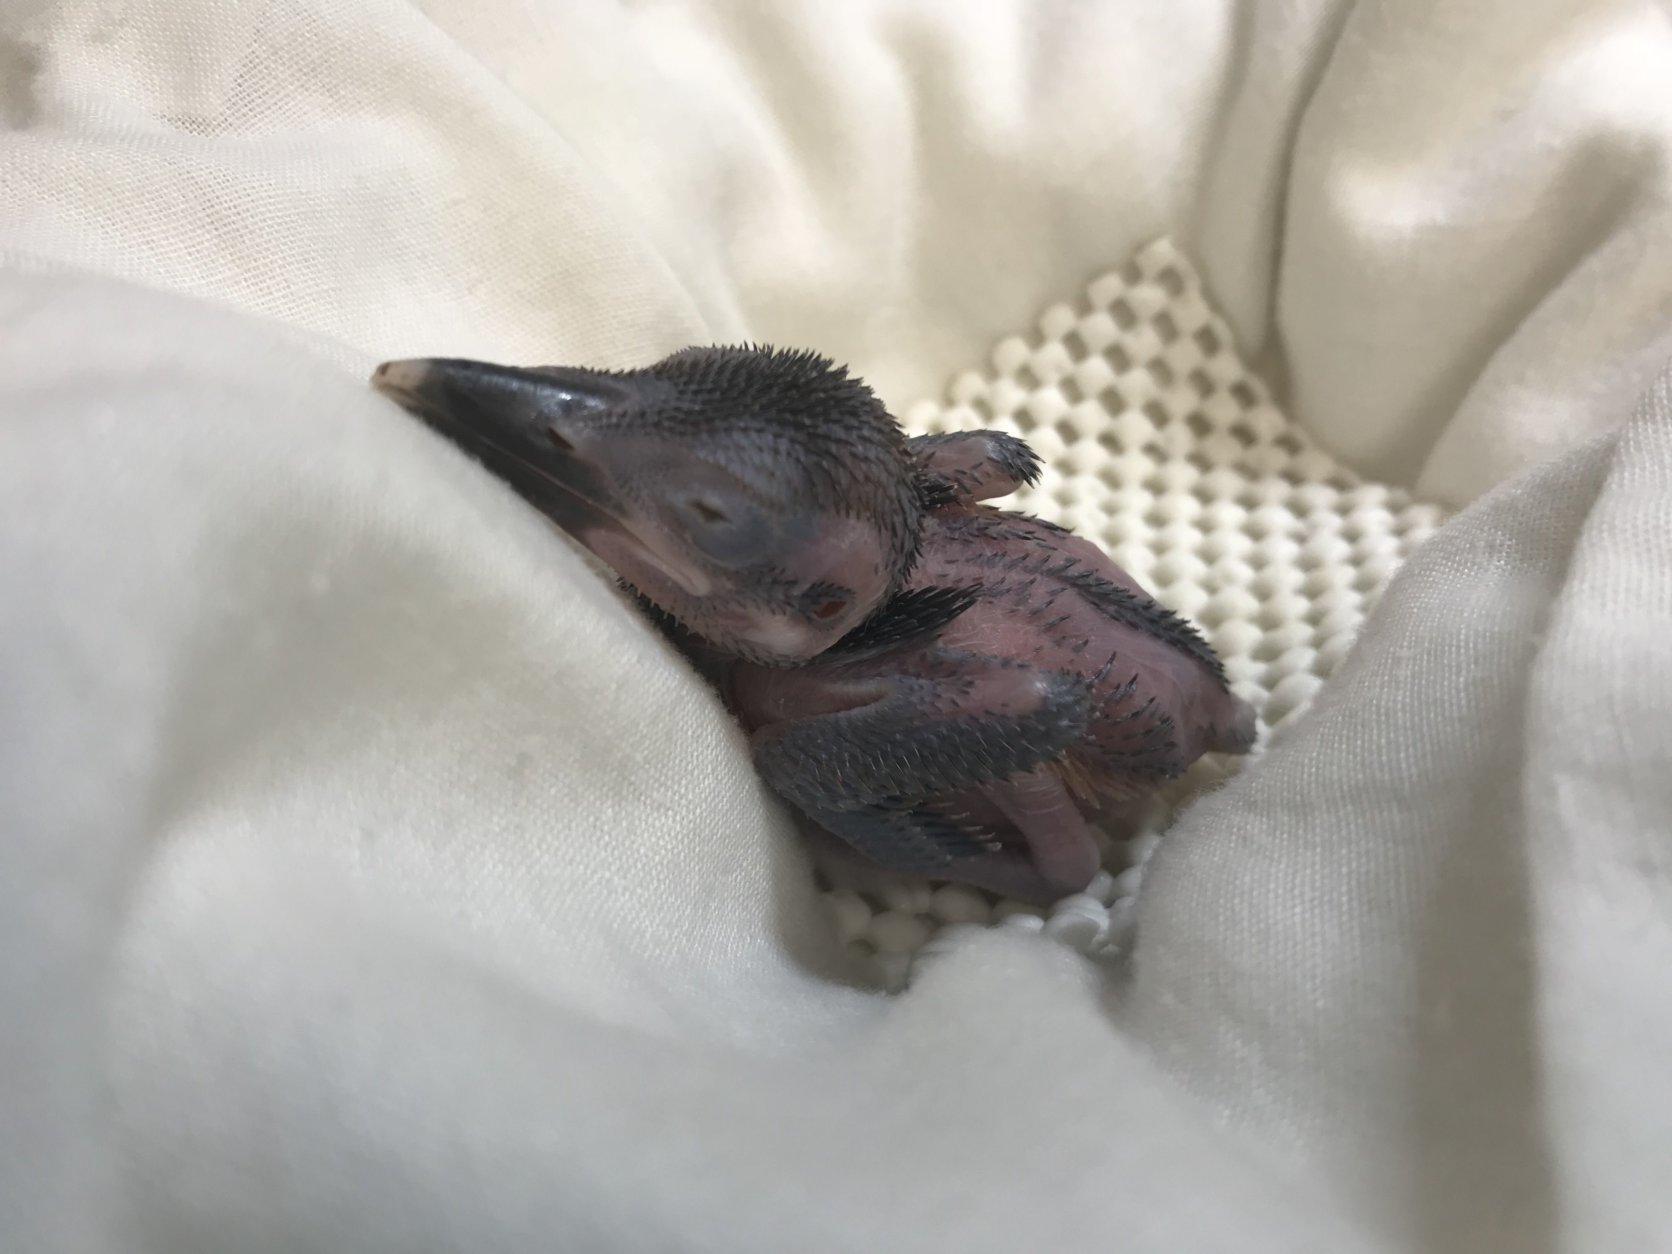 The female Guam kingfisher chick, 10 days after hatching. (Photo courtesy of the Smithsonian Conservation Biology Institute)